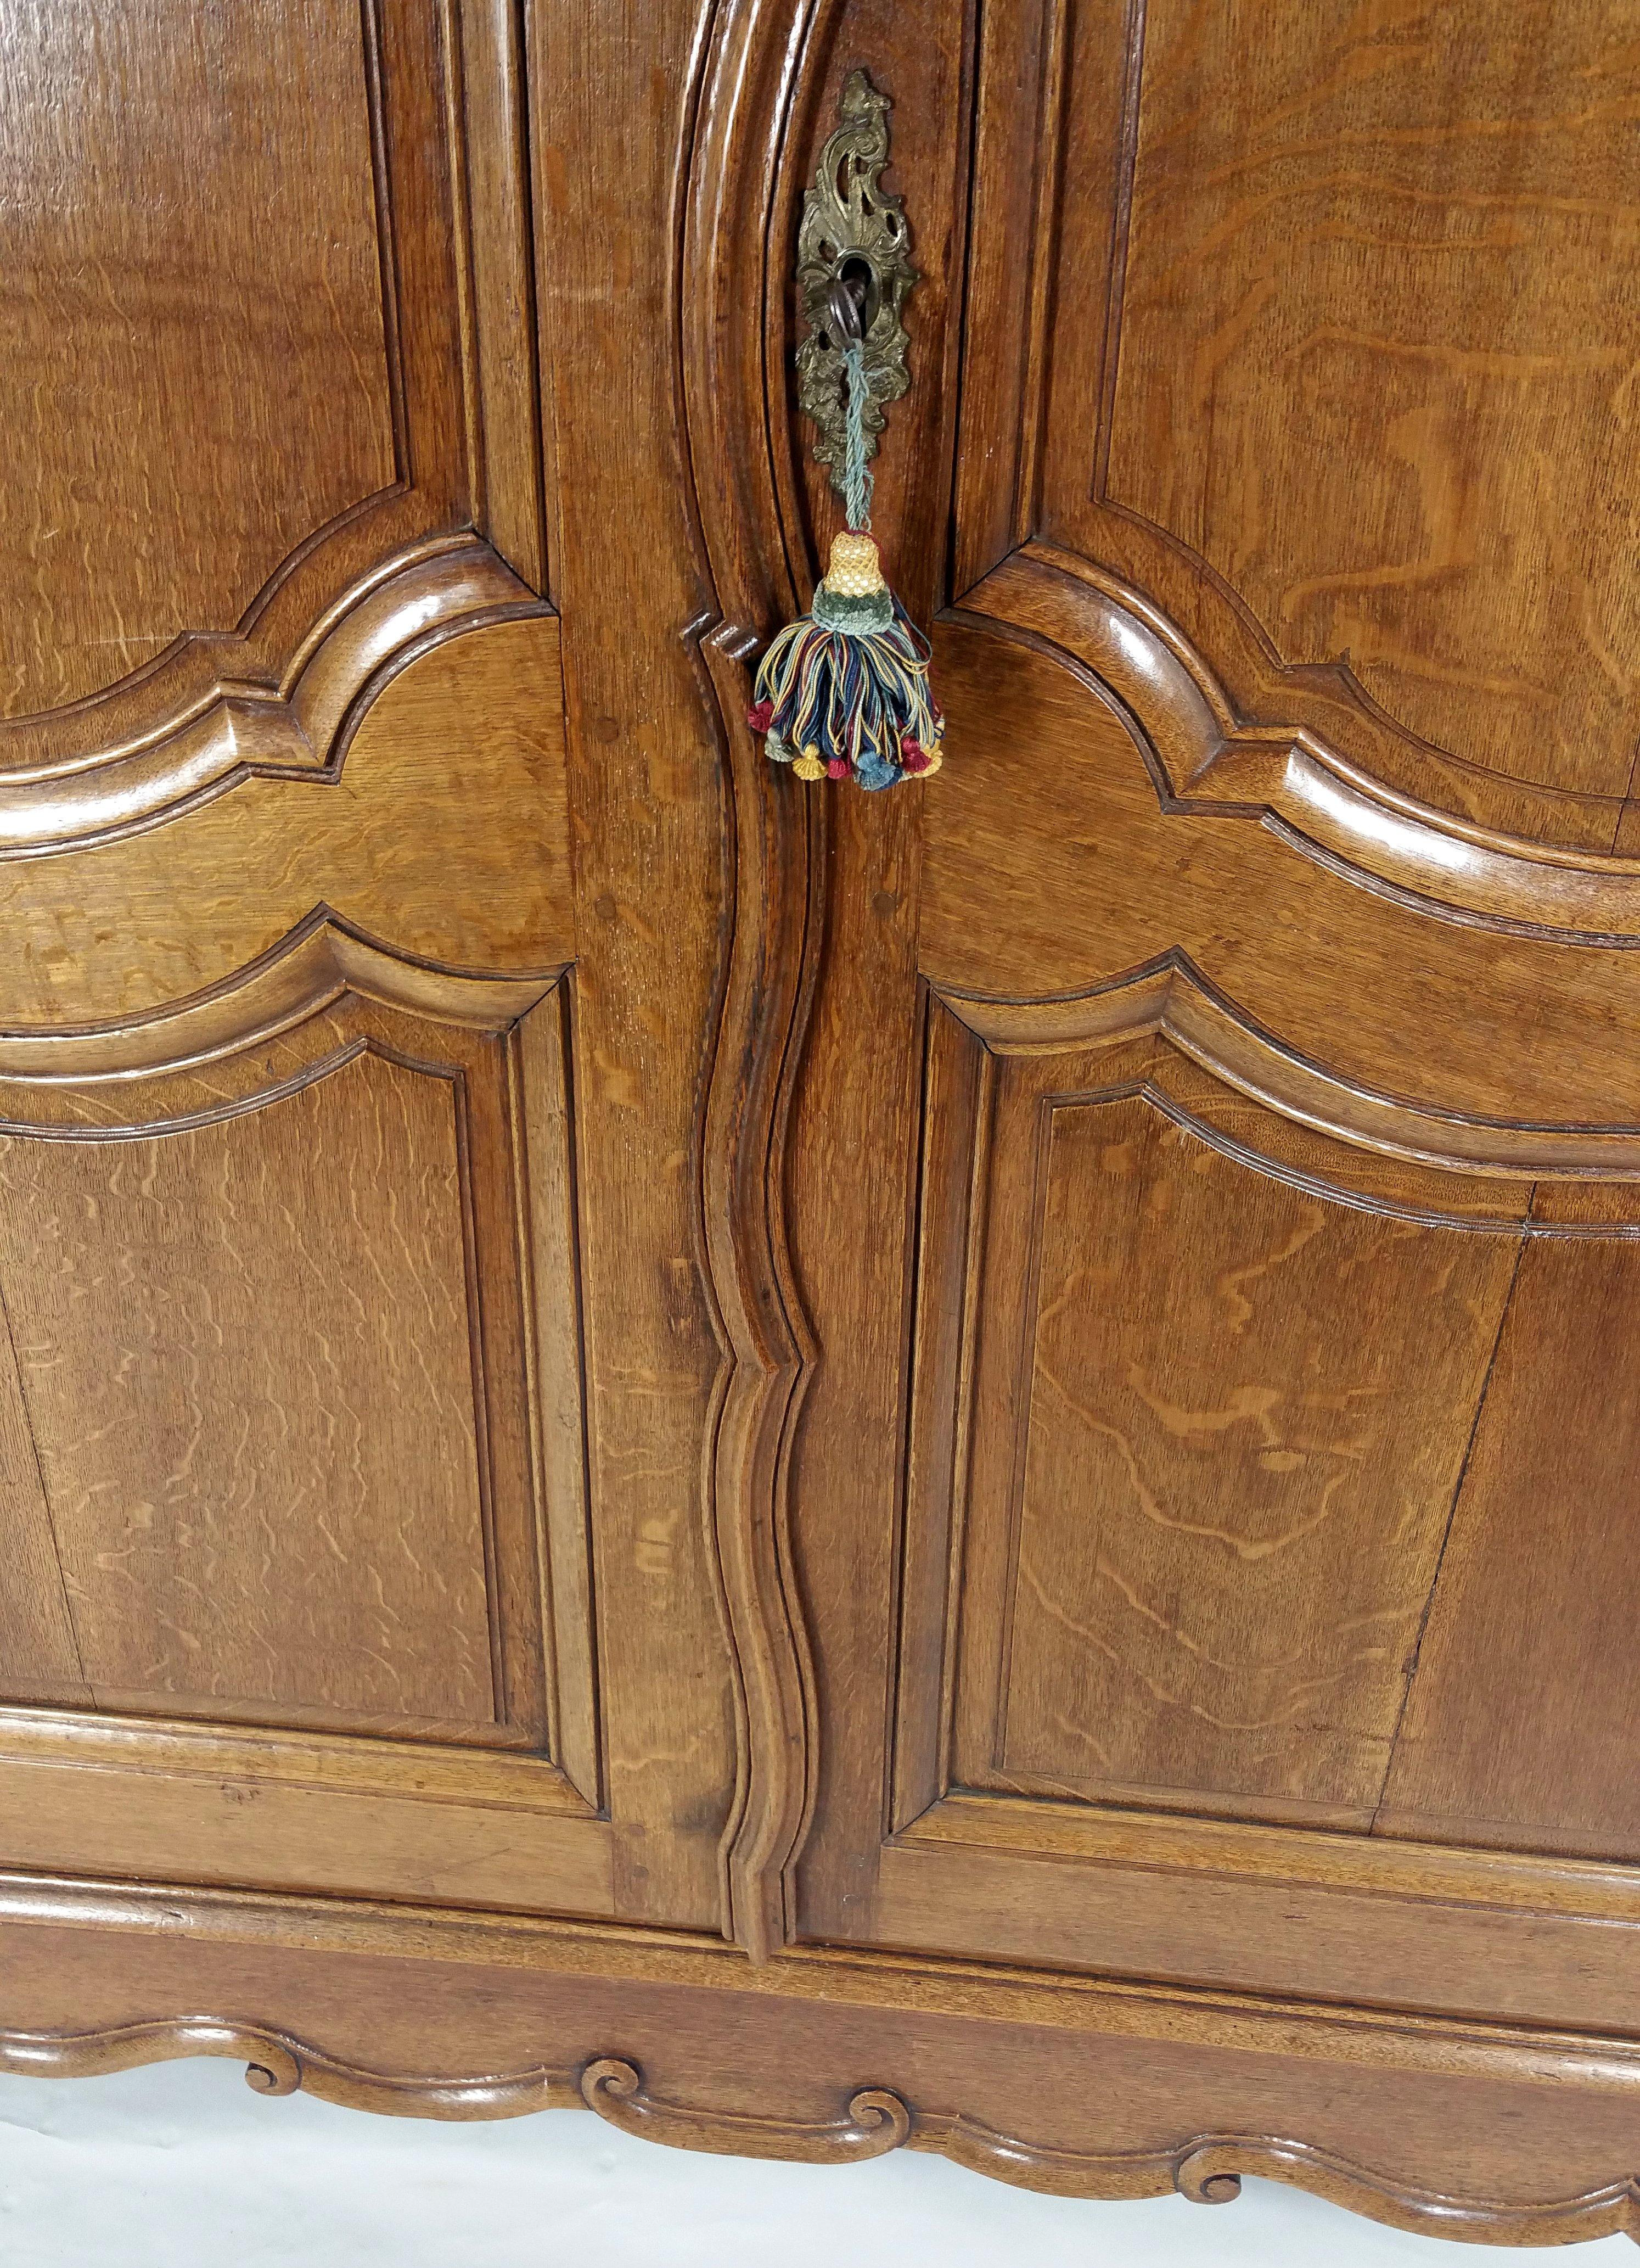 This outstanding and well-crafted French 18th century carved oak large armoire features shaped panelled doors with the original lock and key, as well as 2 removable shelves on the bottom. It is a ‘flat pack’ design, so it can easily be removed and